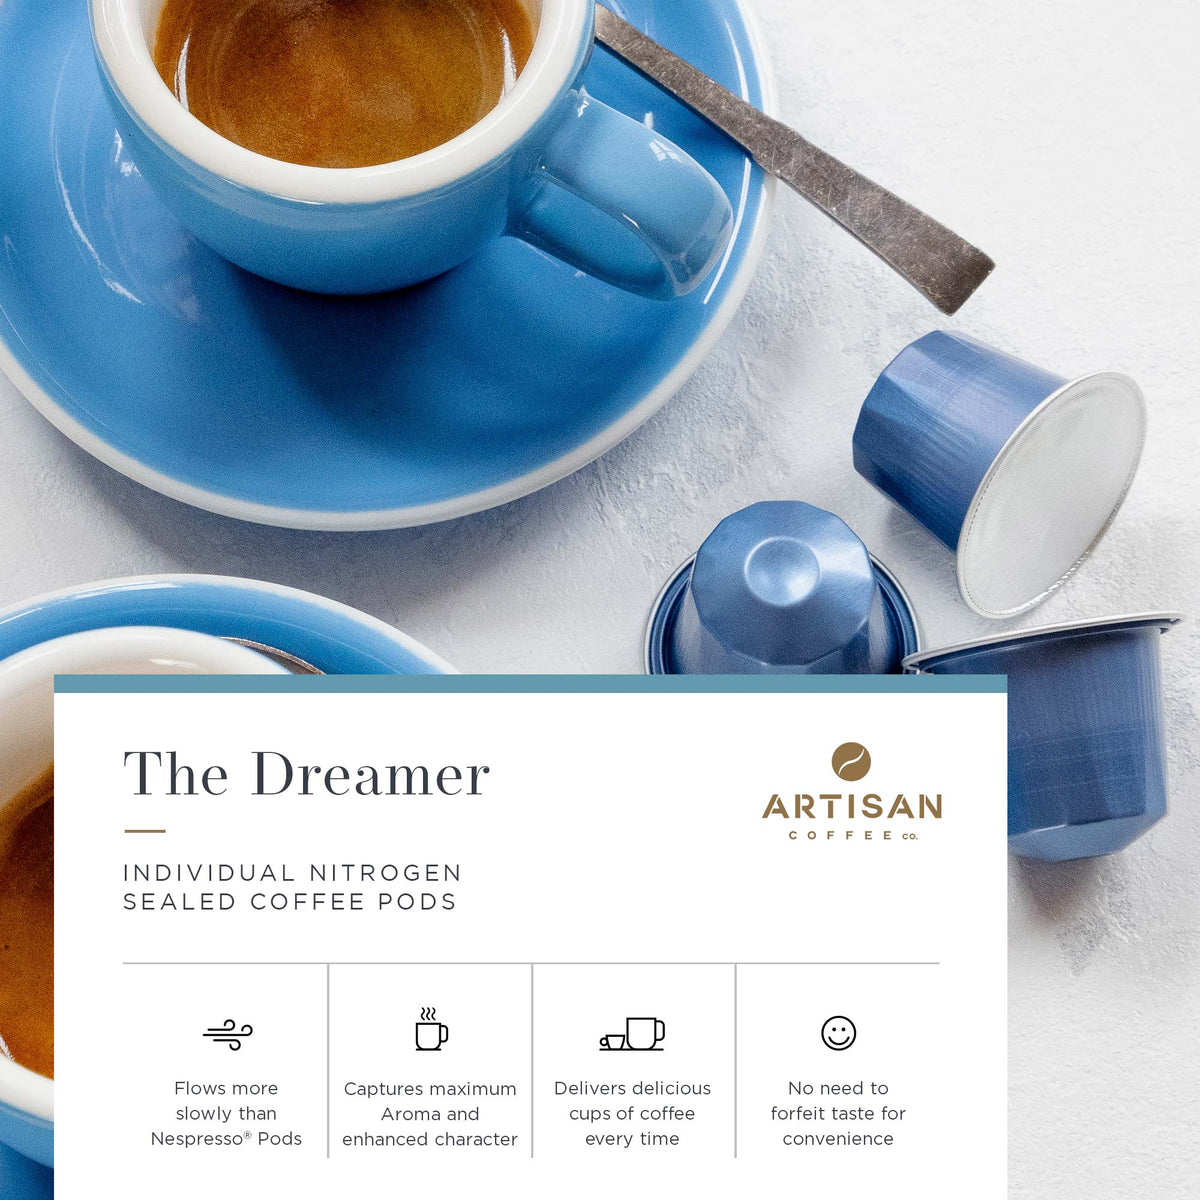 Artisan Coffee Co The Dreamer Pods Infographic Nitrogen sealed